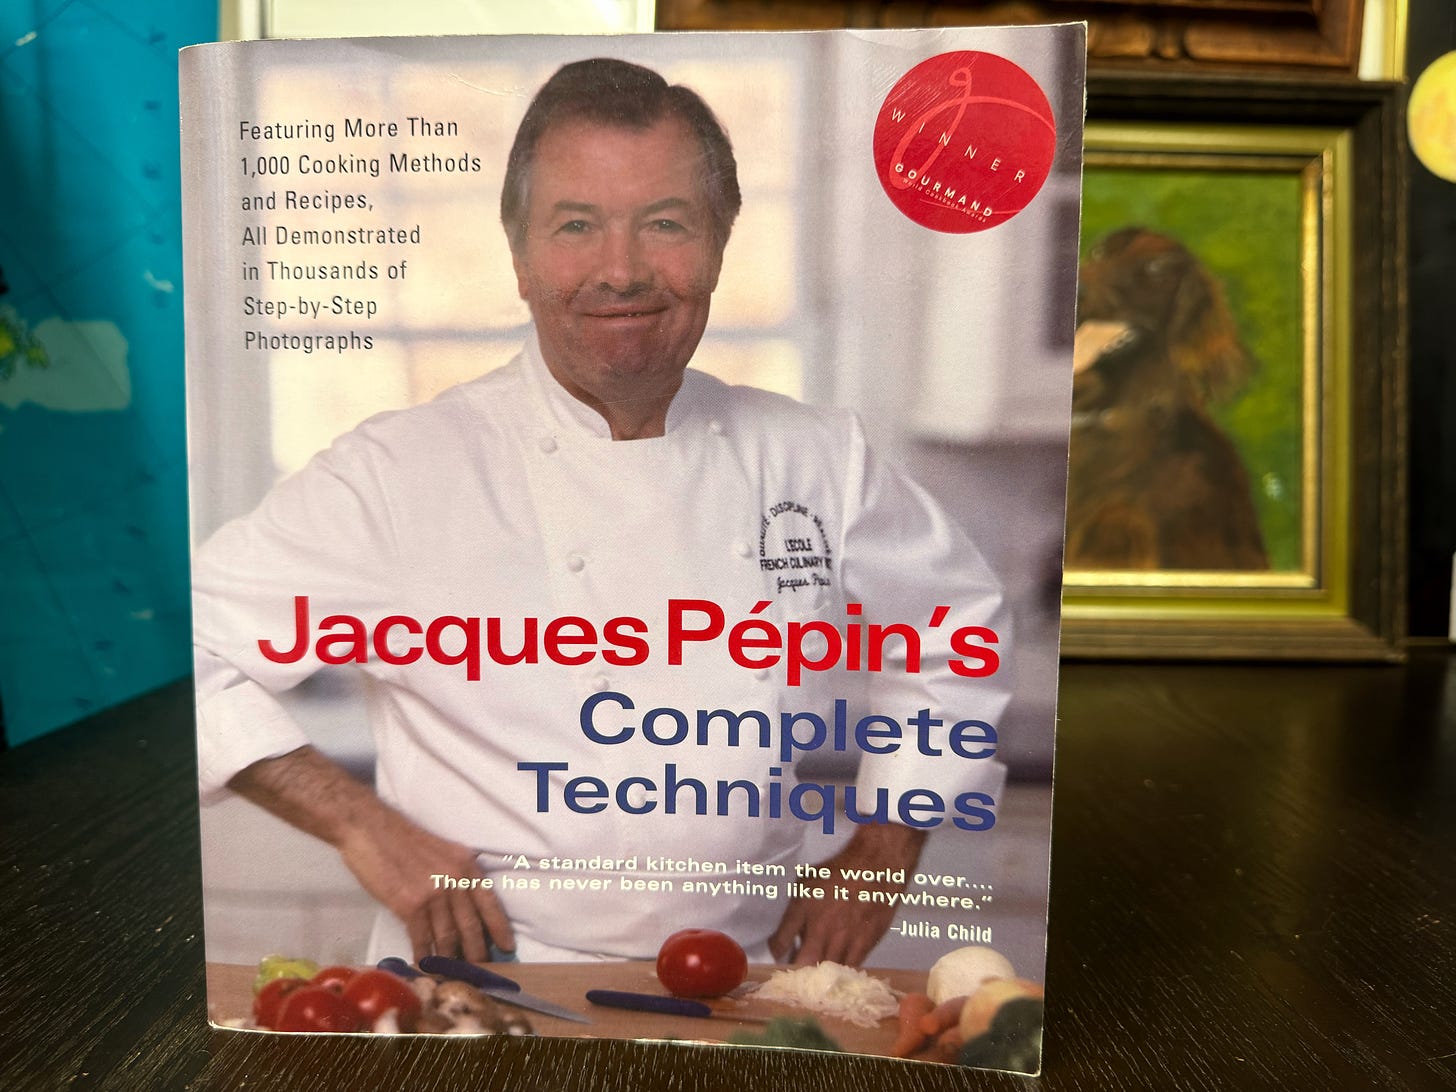 A copy of Jacques Pepin's Complete Techniques on a table. The cover reads, "Featuring more than 1,000 cooking methods and recipes. All demonstrated in thousands of step-by-step photographs." There is a blurb from Julia Child that reads, "A standard kitchen item the world over... There has never been anything like it anywhere."